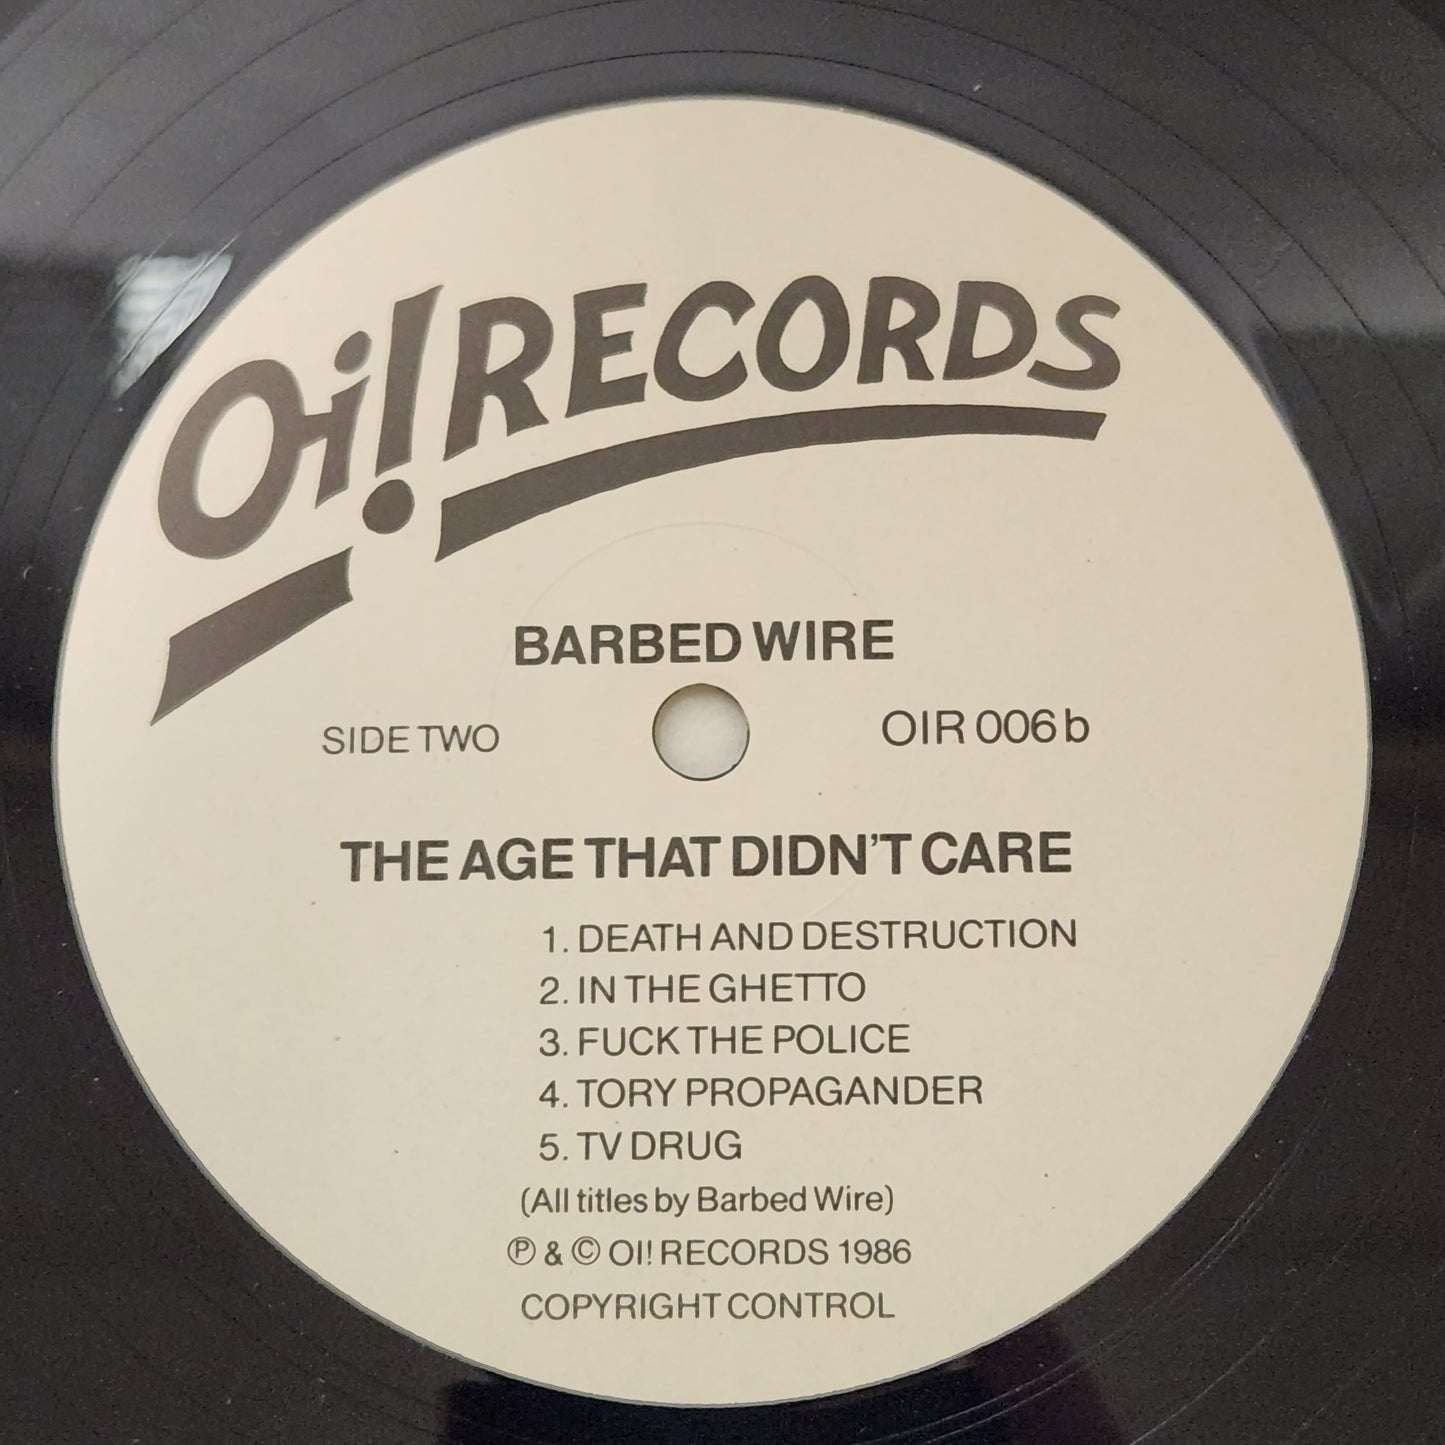 Barbed Wire "The Age That Didn't Care" 1986 Punk Oi Record Album (UK Pressing)